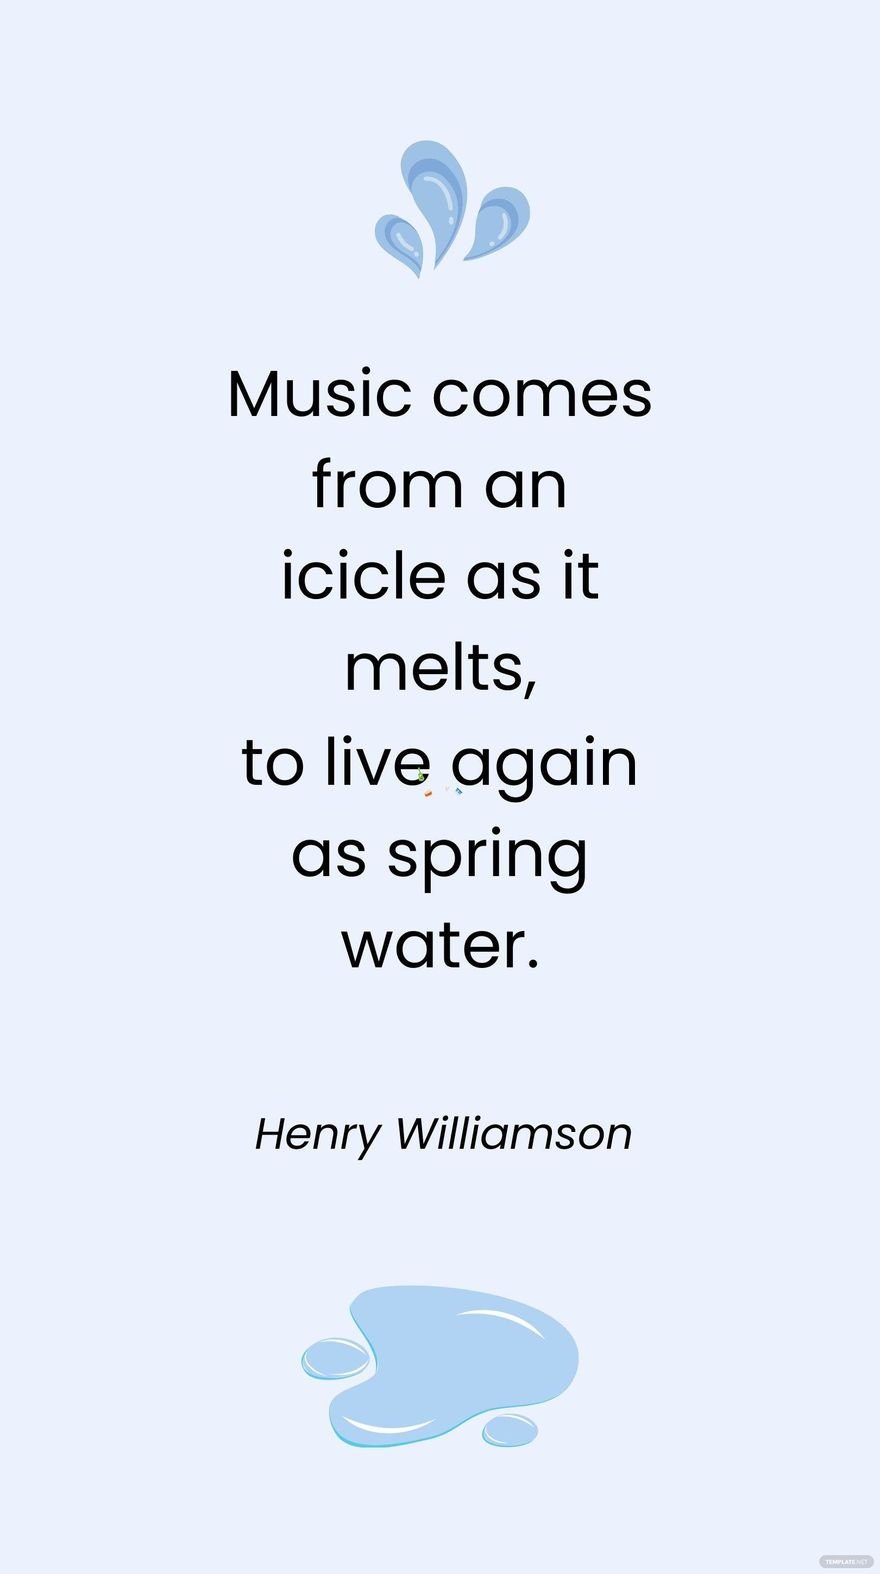 Free Henry Williamson - Music comes from an icicle as it melts, to live again as spring water. in JPG